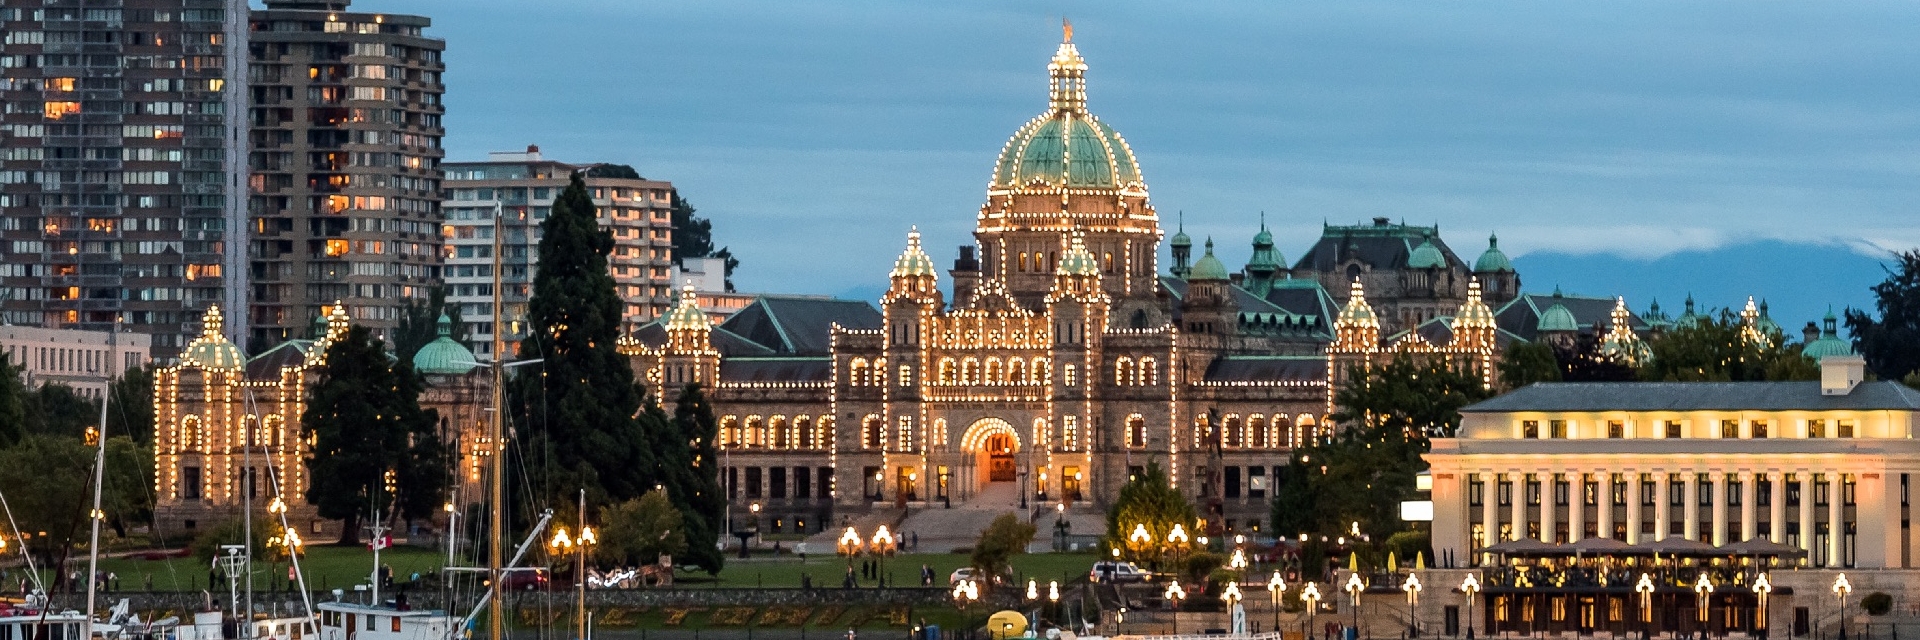 View of parliament building in Victoria.